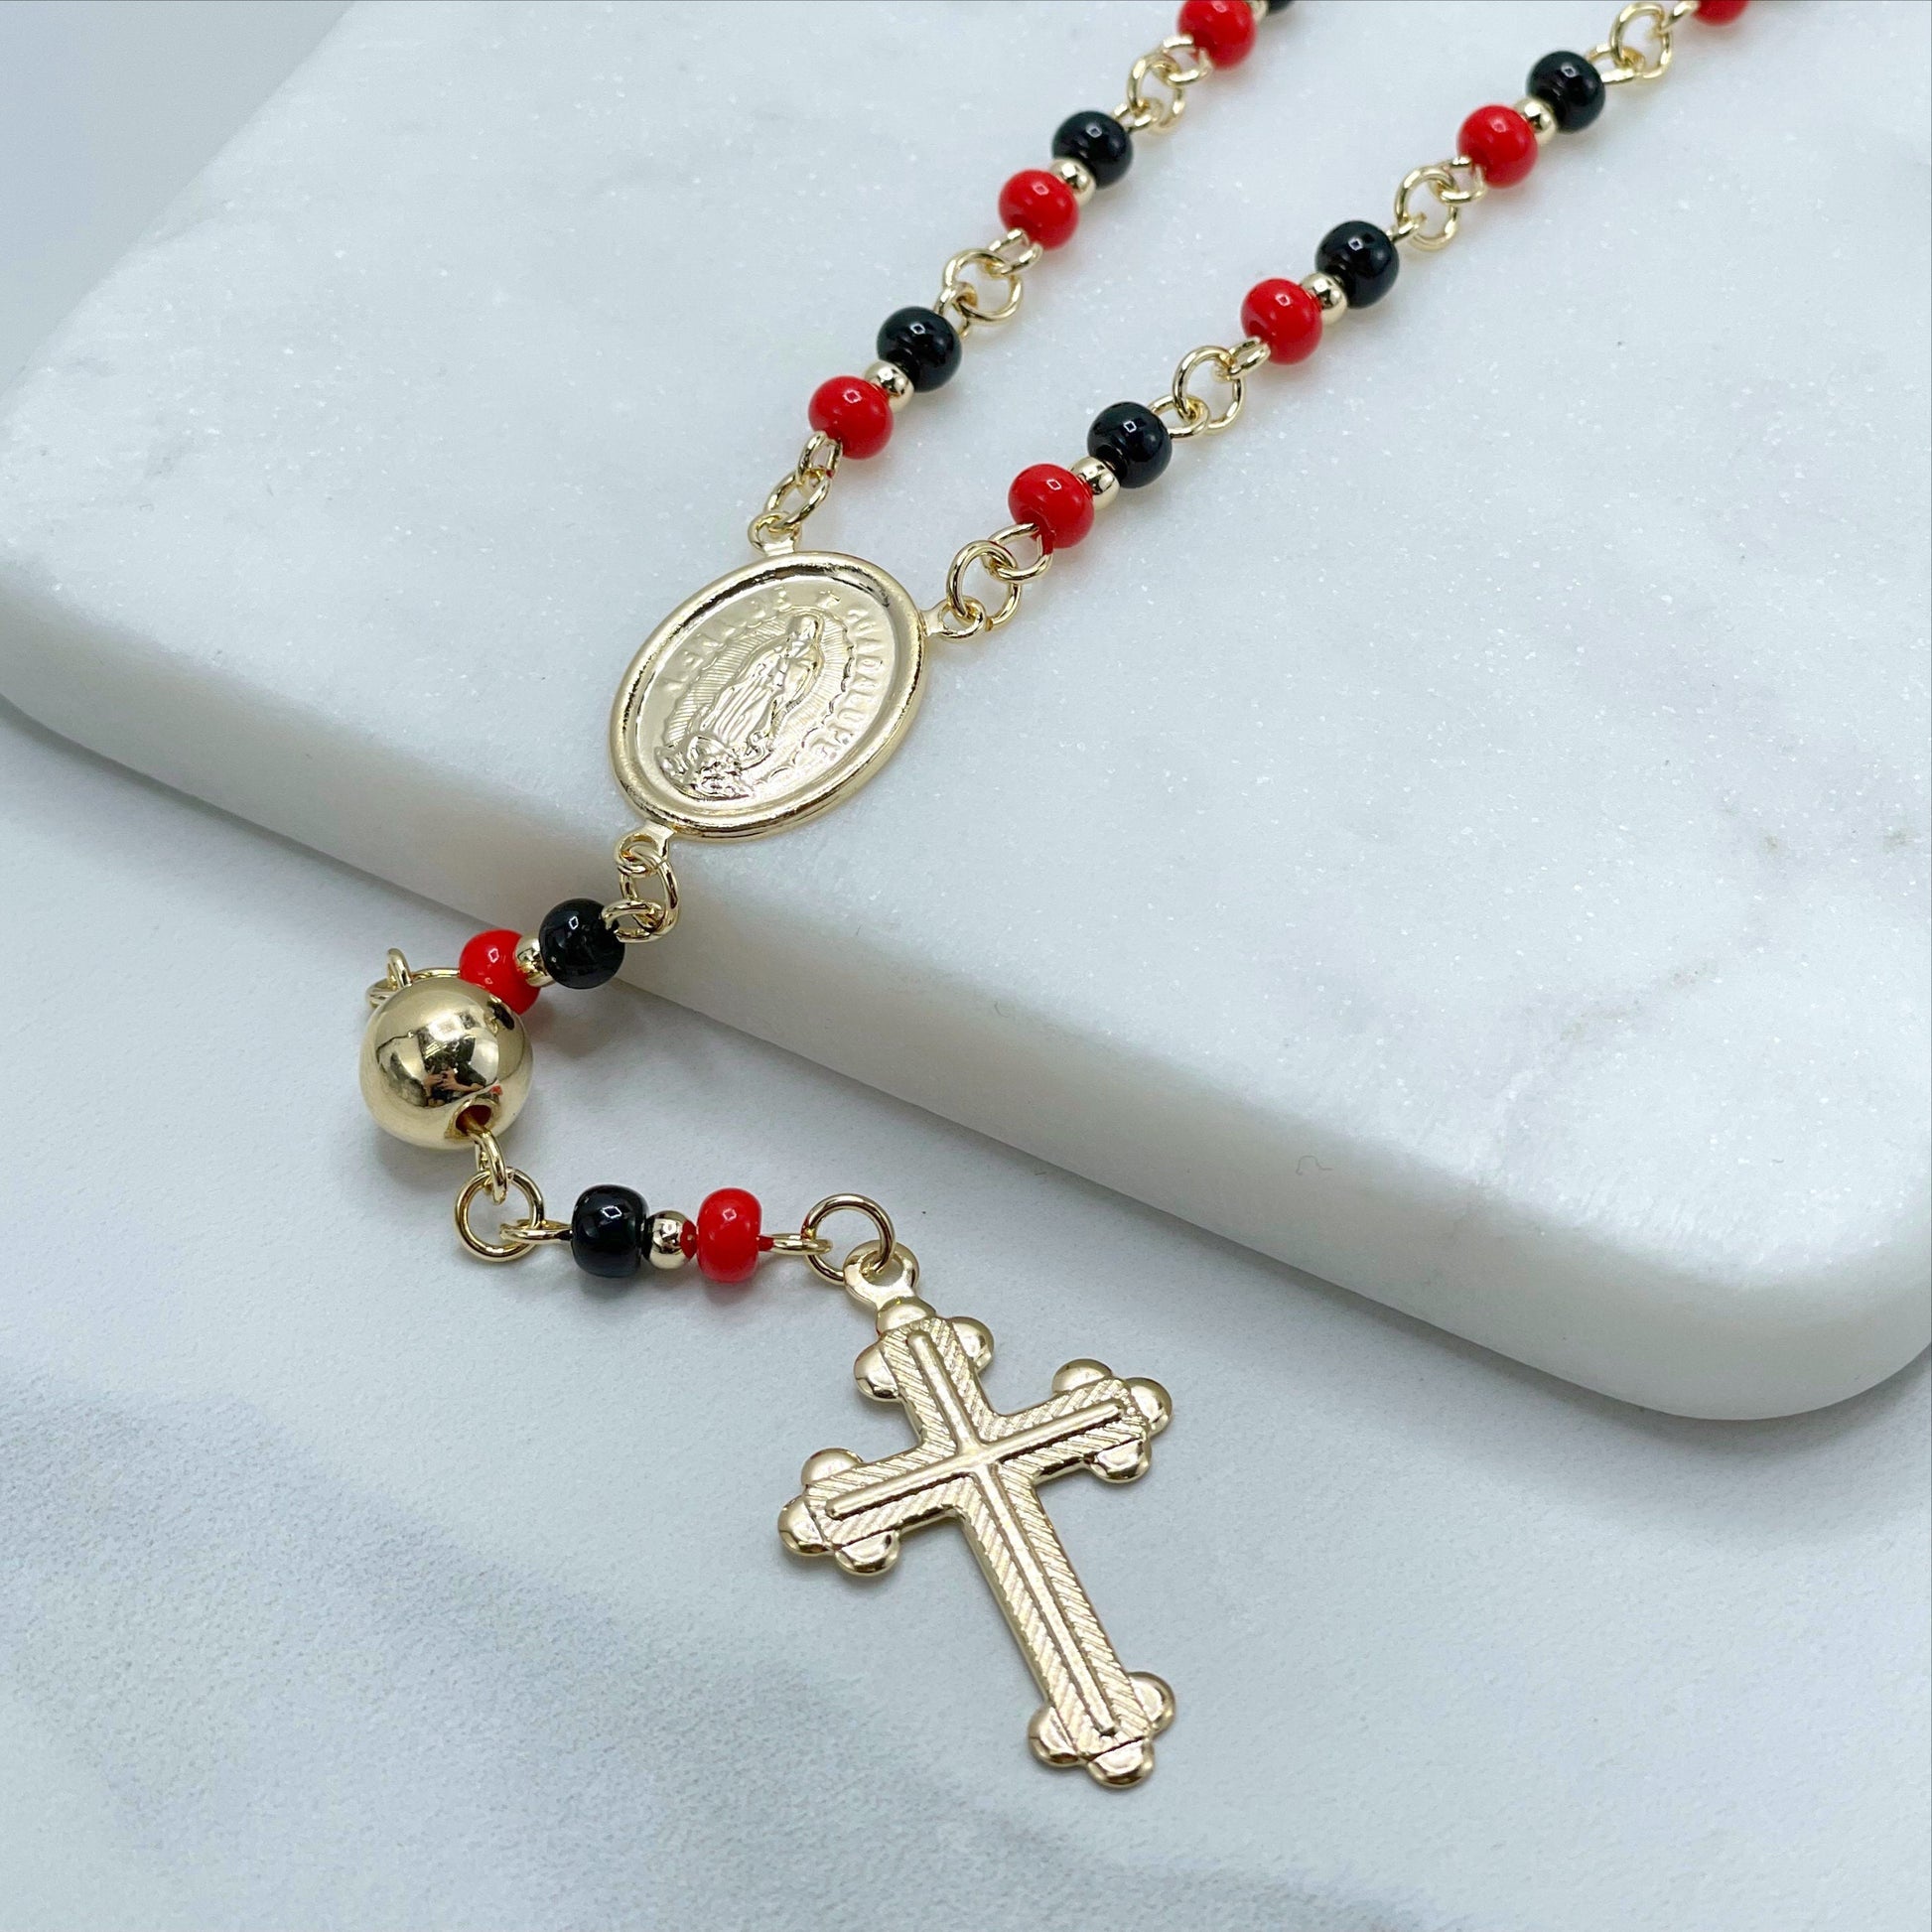 18k Gold Filled Black and Red Beads Simulated Azabache Guadalupe Virgin Beaded Rosary Necklace  Religious Wholesale Jewelry